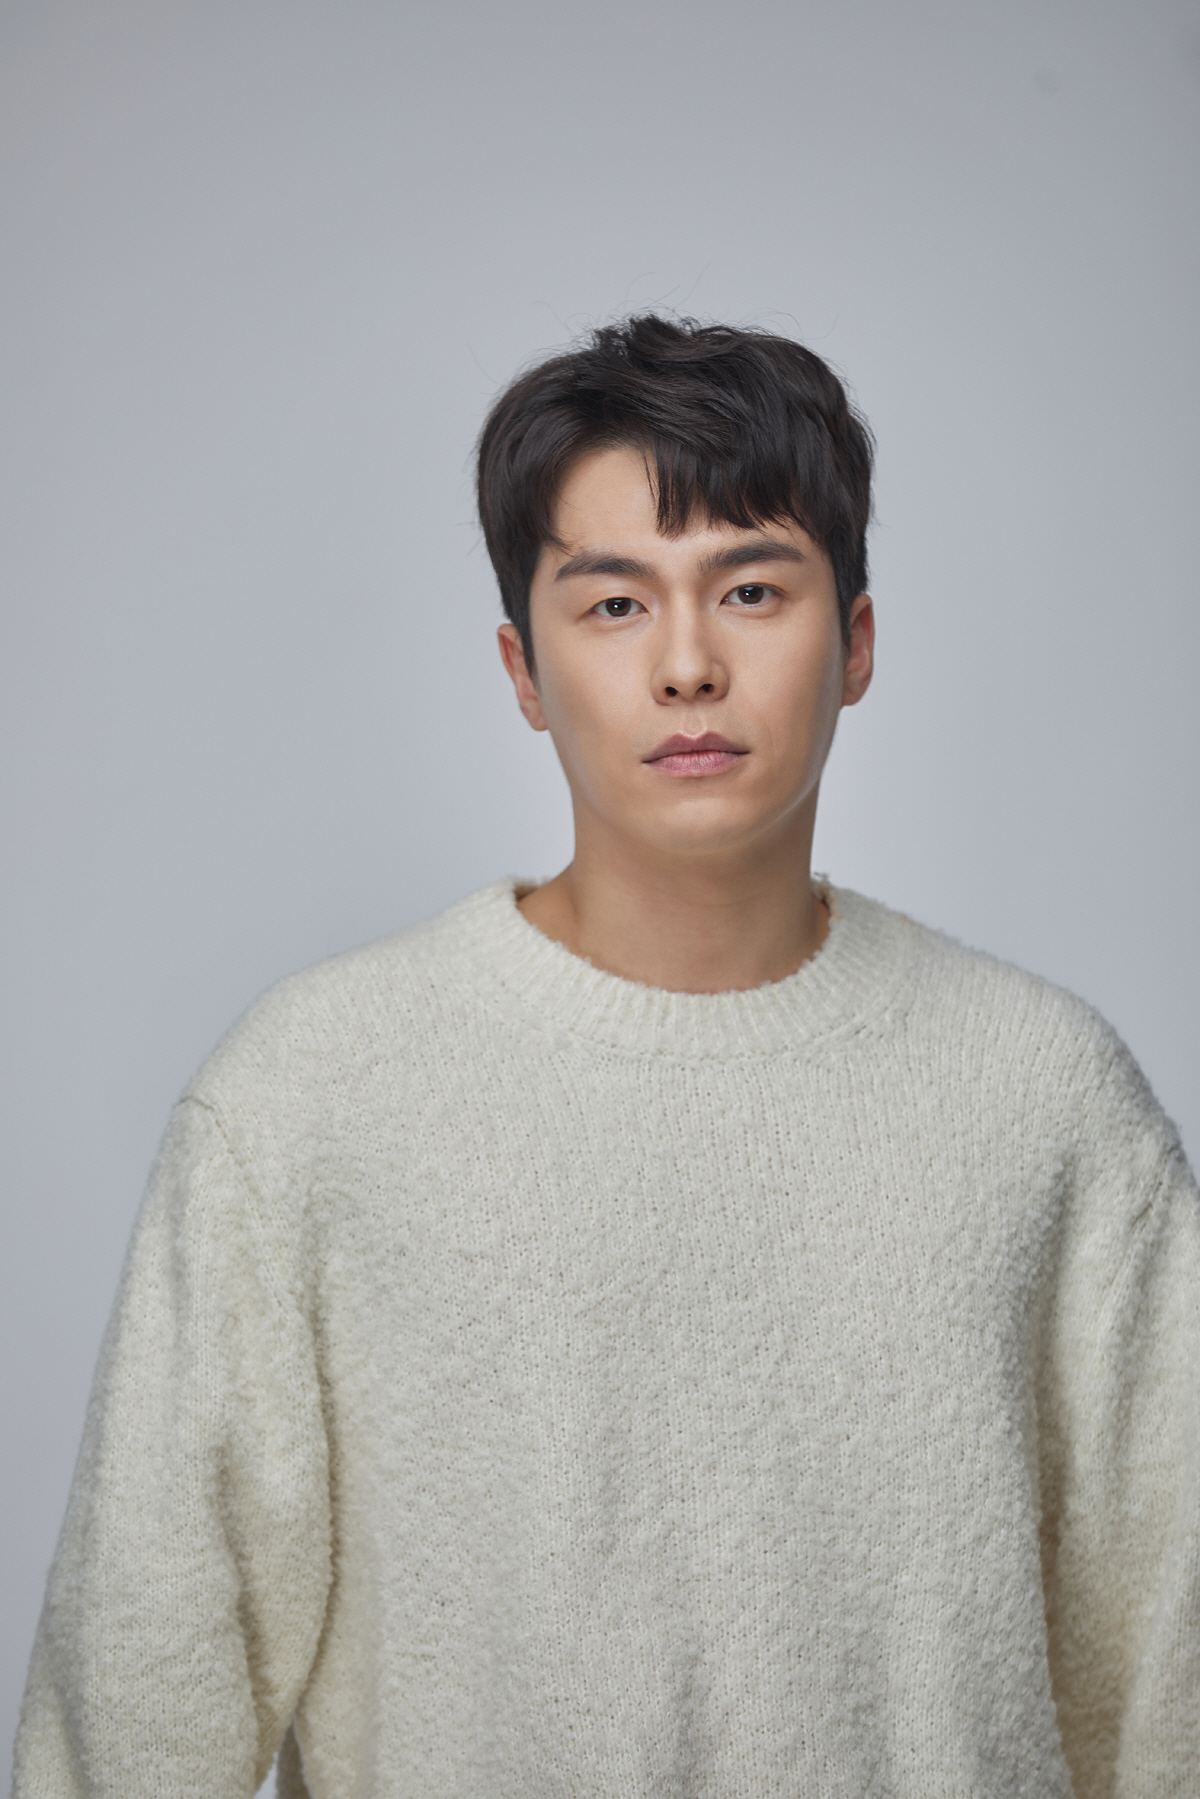 Actor Lee Jae-won has confirmed his appearance on TVNs new Mon-Tue drama Record of Youth.TVN Record of Youth (played by Ha Myung-hee, directed by Ahn Gil-ho) starring Lee Jae-won draws a growth Record of Youth people who try to achieve dreams and love without despairing on the wall of reality.In addition, director Ahn Gil-ho, who showed the power of detailed and delicate directing through Secret Forest, Memories of Alhambra Palace, and WATCHER, and writer Ha Myung-hee, who melts realistic eyes to warm and emotional stories such as Doctors and Love Temperature, are gathering expectations.Lee Jae-won predicted that he would show the chemistry between the disassembled brothers with his brother, Sak Kyung Jun, by Sa Hye-joon (Park Bo-gum), who dreams of being a model and actor in the play.Sak Kyung Jun is a son who has not missed the first place since he was a child. He feels a great sense of responsibility as his eldest son, but he is a poisonous personality for his younger brother.The brother of two people, Kimi, as well as the eldest son of the family Sae, Sae Kyung Jun is expected to revitalize the drama.Previously, Lee Jae-won has shown a wonderful working daddy growing up through SBS drama VIP, and TVN Drama Stage 2020?I am an object, and transformed into a passionate living lawyer, giving a smile and impression to the room with a tight reality acting.Lee Jae-won, who has been on a ten-day basis with his solid acting skills accumulated through various roles, is concentrating attention on viewers by foreseeing another character transformation through tvNs new Mon-Tue drama Record of Youth.On the other hand, TVNs new Mon-Tue drama Record of Youth, which Lee Jae-won confirmed, will be broadcasted on TVN at 9 pm on September 7th.